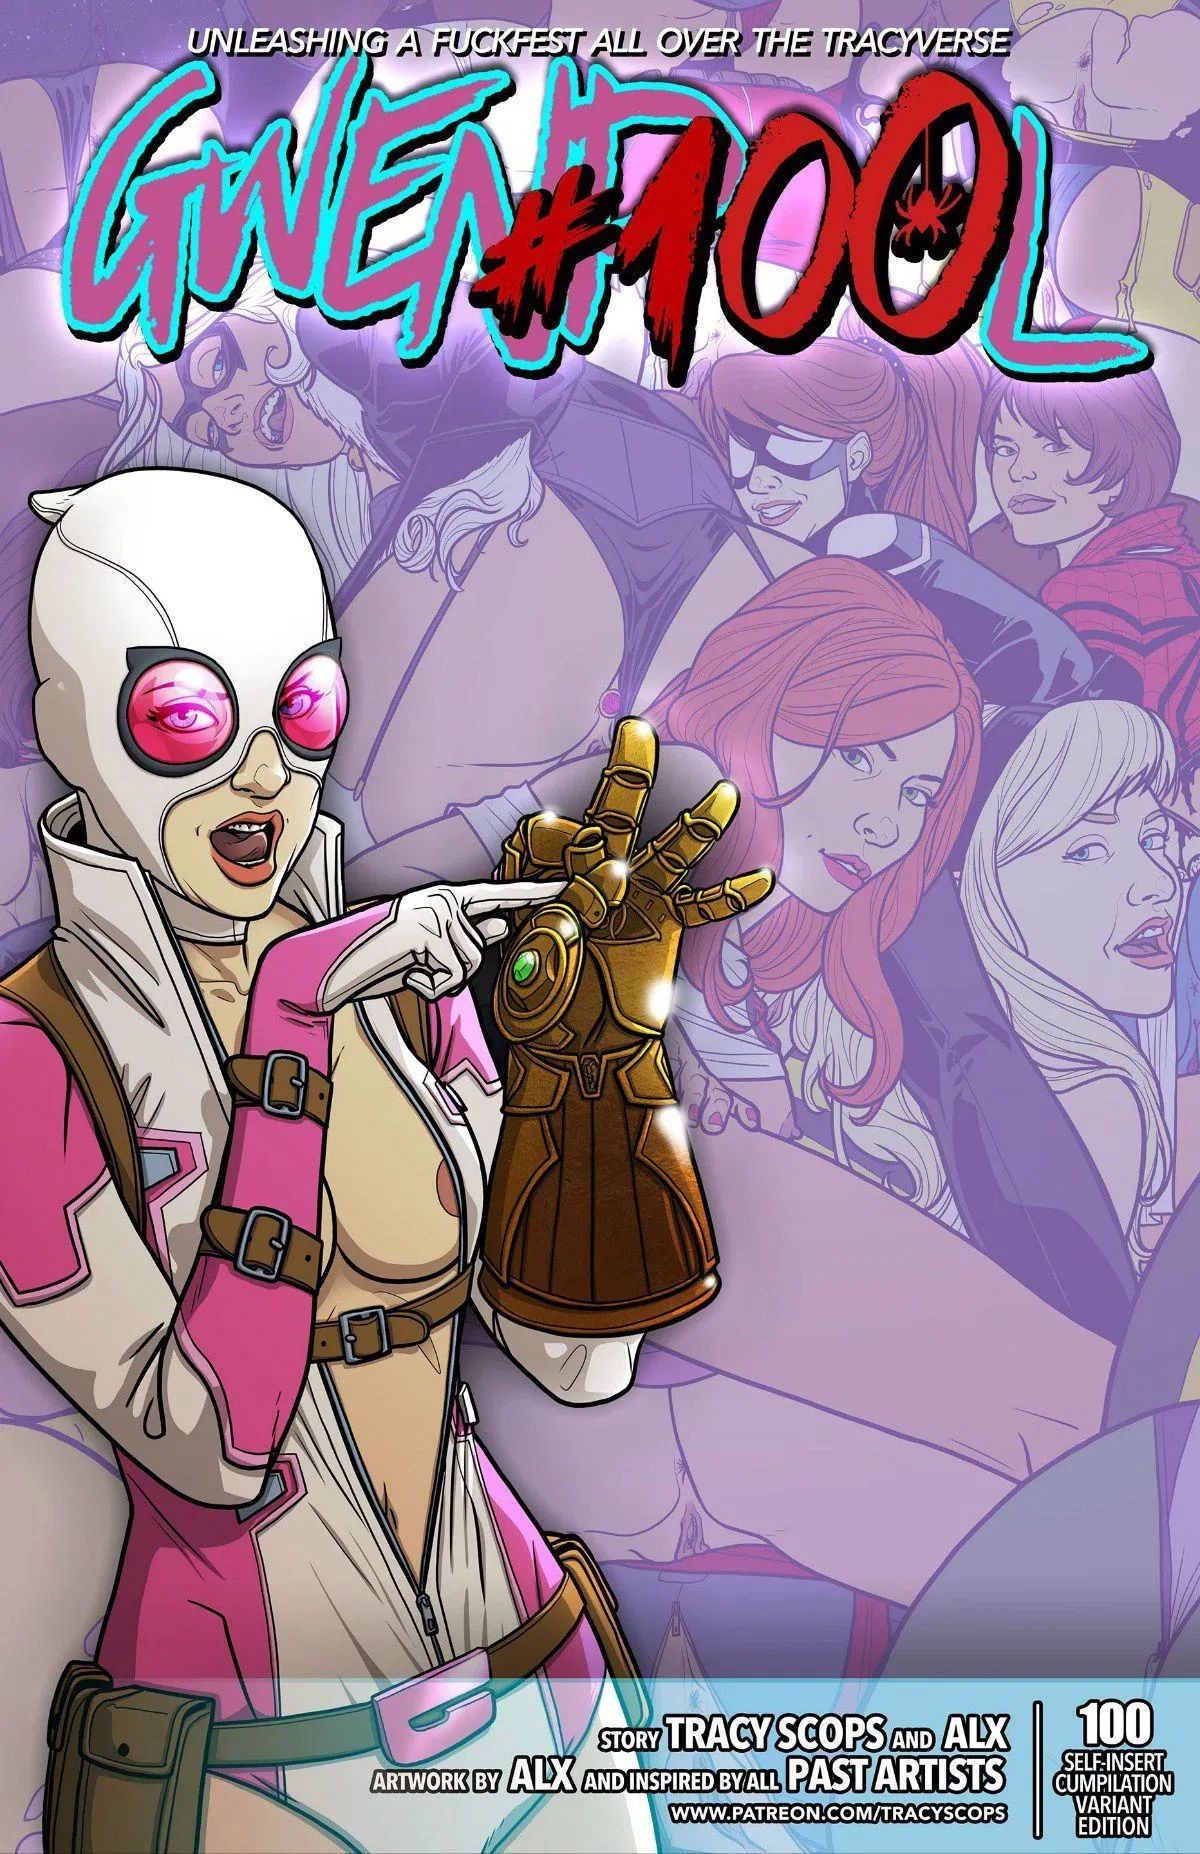 Hardcore Rough Sex (Tracy Scops) - Gwenpool #100 Gay Natural